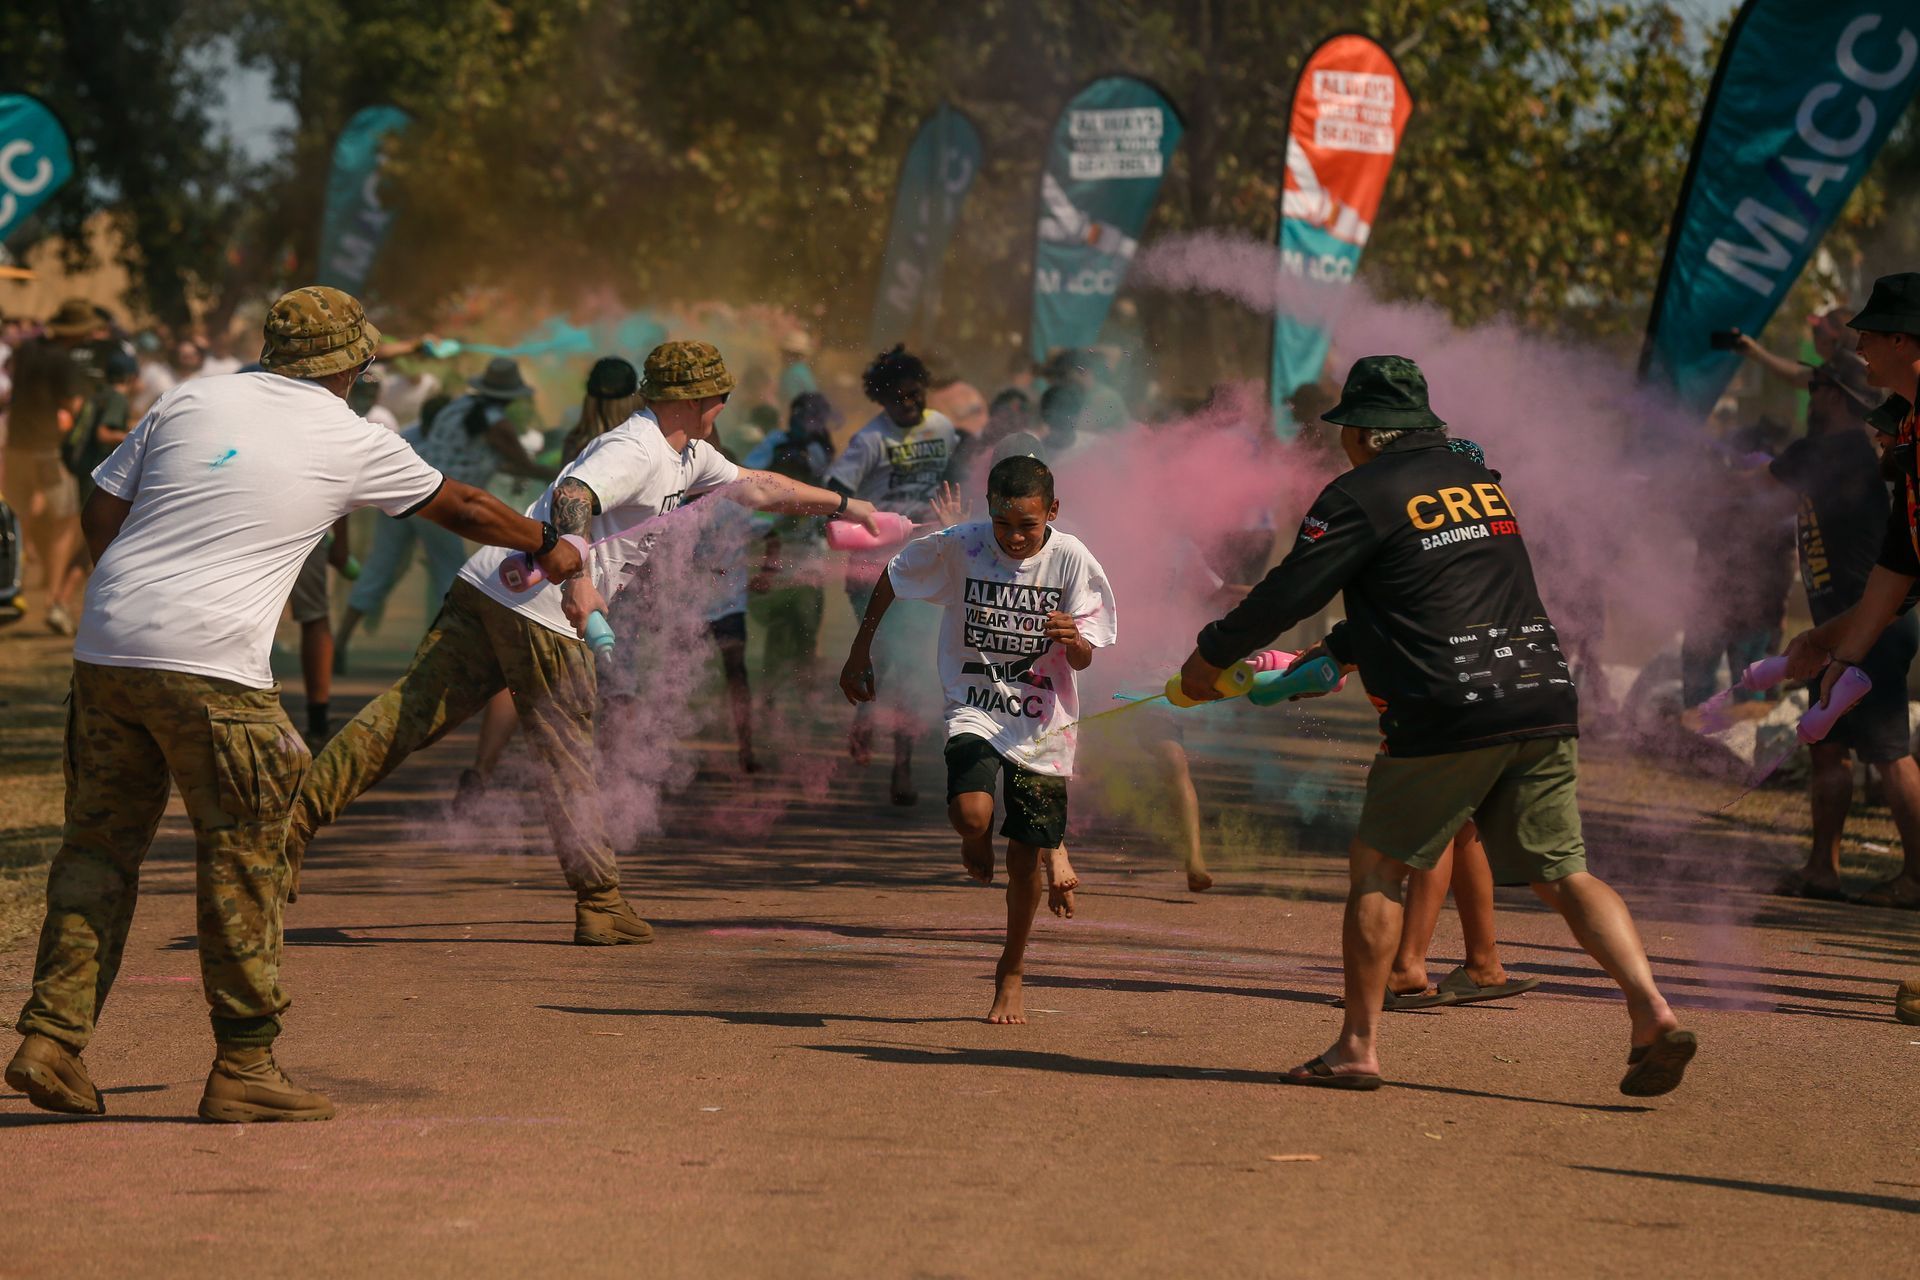 A group of people are playing with colored powder in a park.